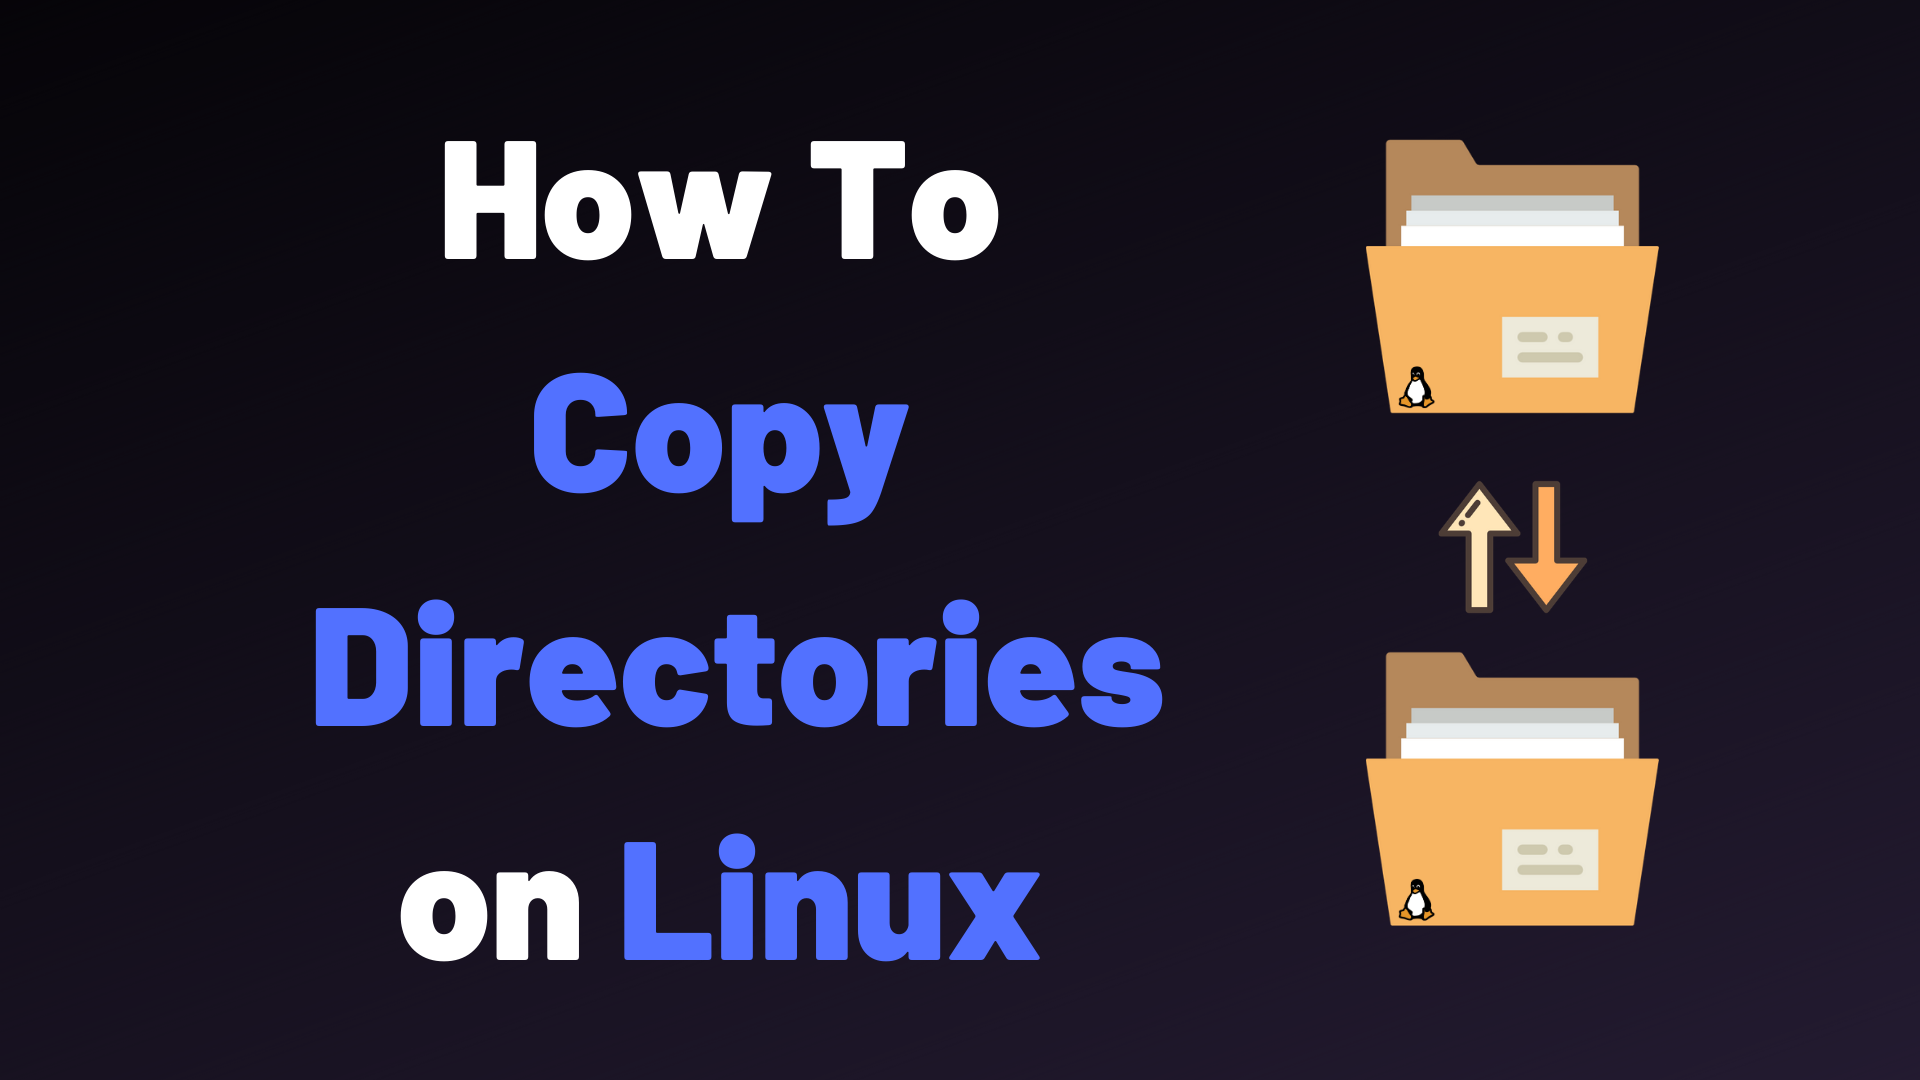 How To Copy Directory on Linux